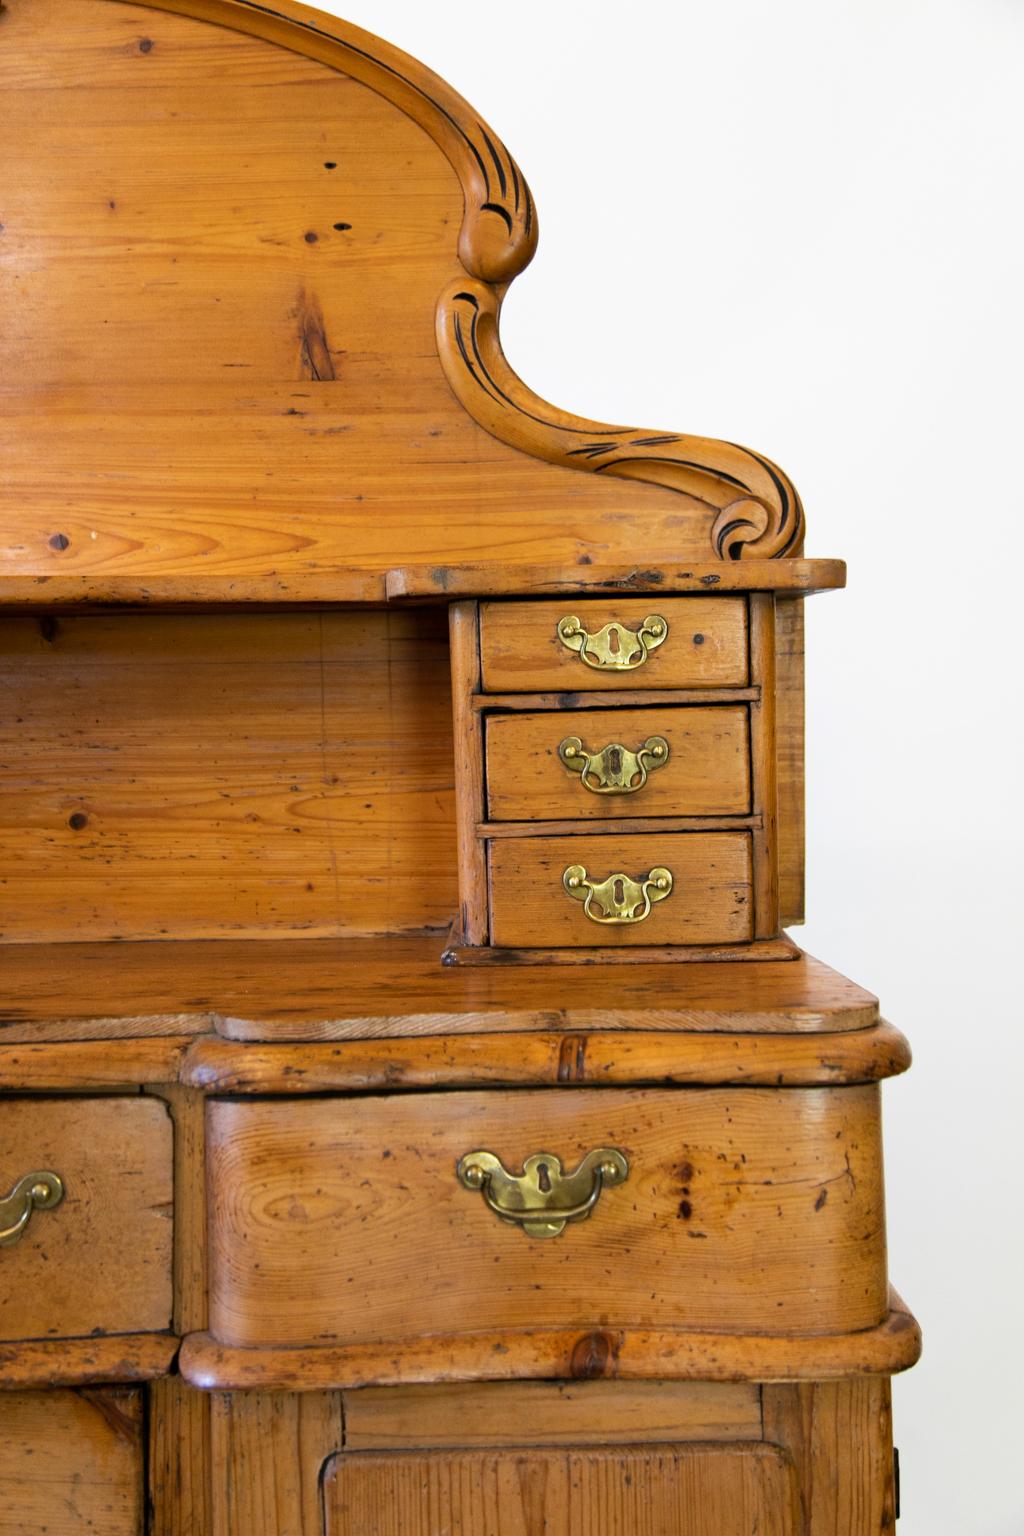 English pine sideboard, with the top half having six drawers below a shaped shelf. The back has applied carved moldings and a center crest. The lower half has five shaped drawers and two doors with raised panels attached to the frame.
 